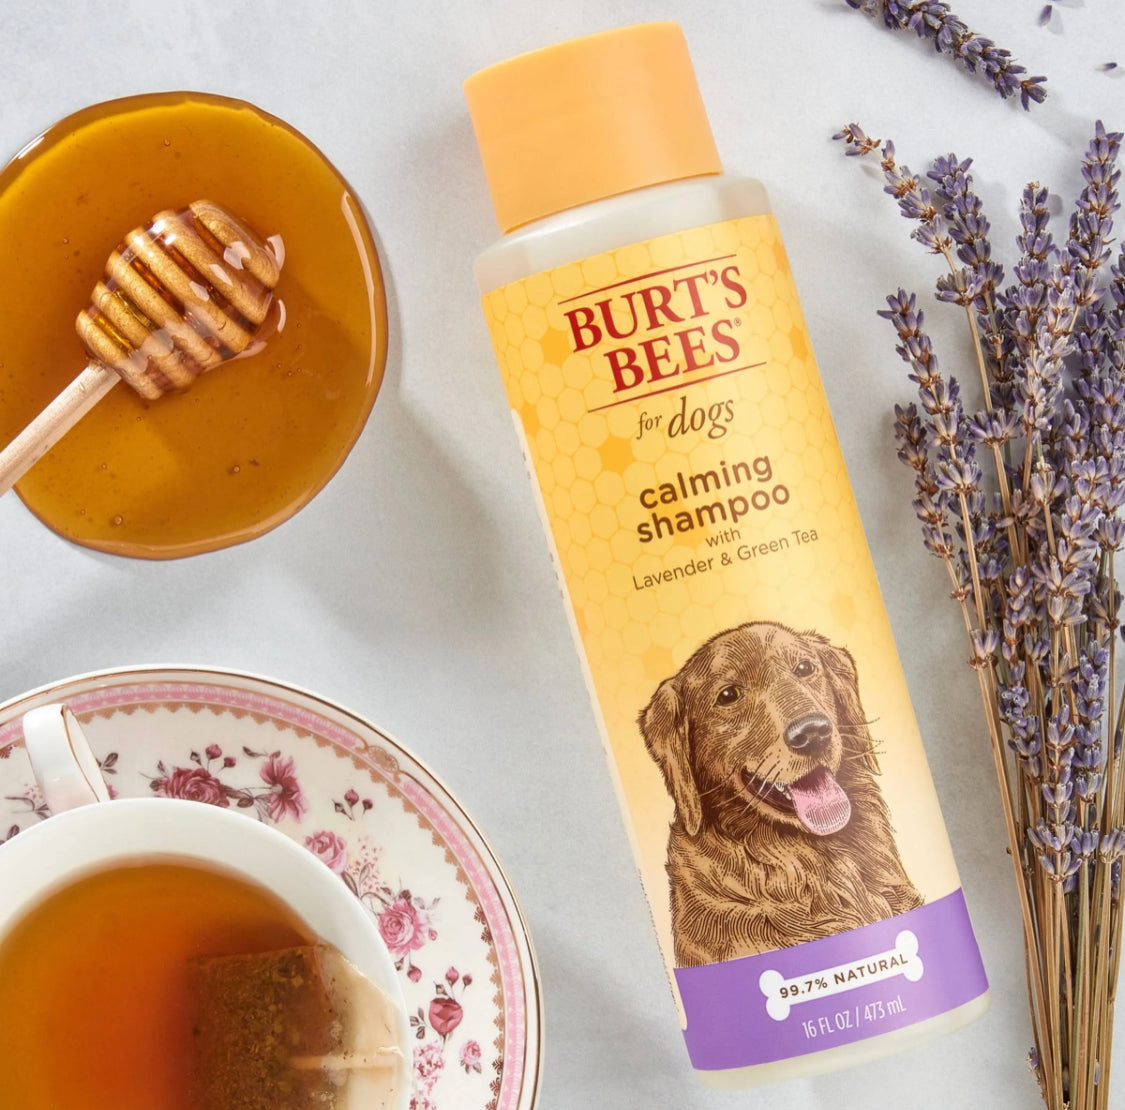 Burt’s Bees for Dogs Calming Shampoo with Lavender and Green Tea, 16 Ounces